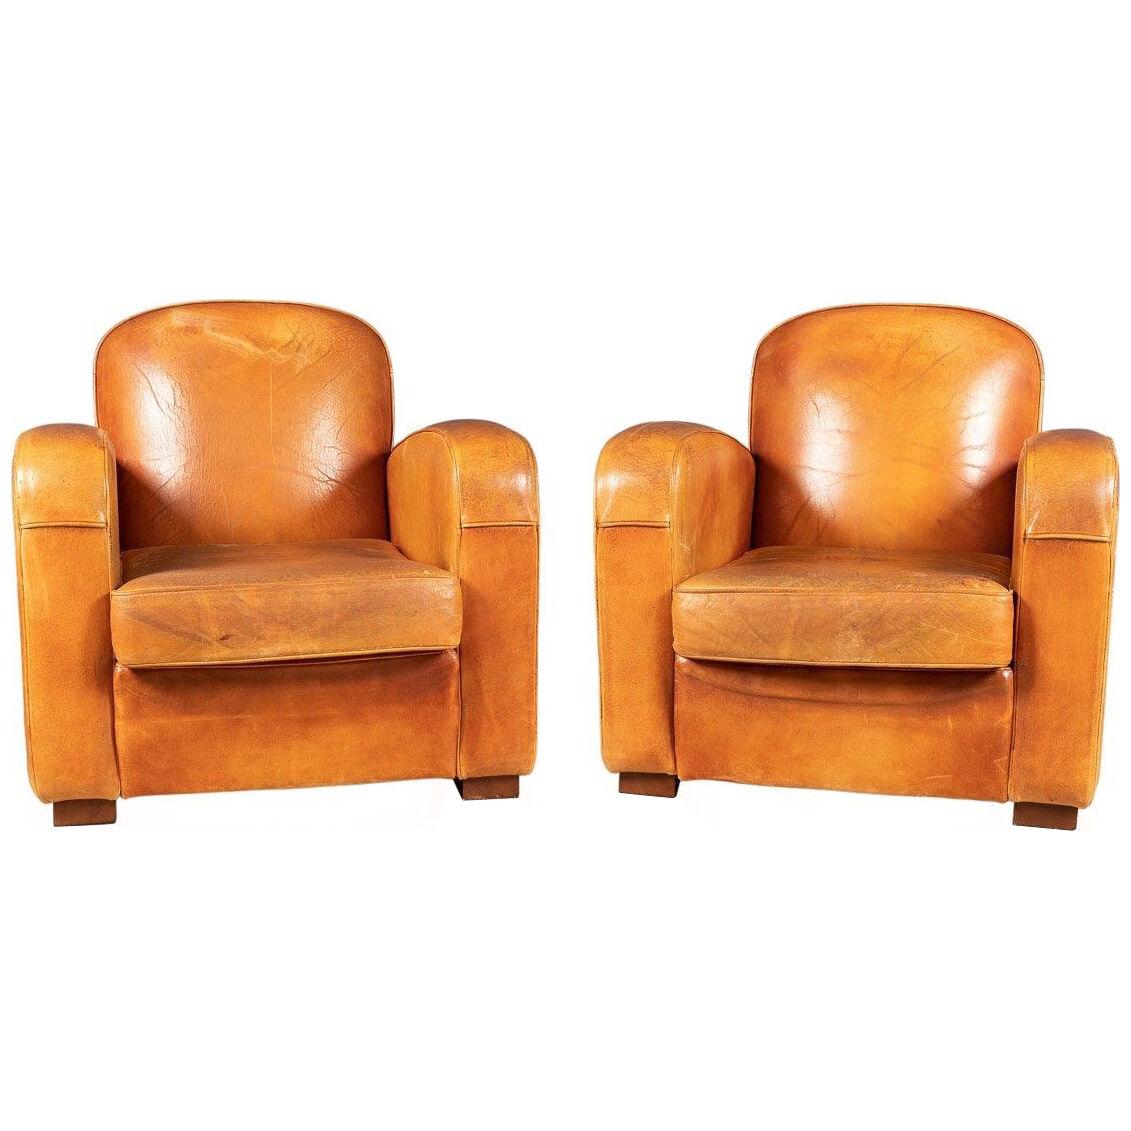 Late 20th Century Pair Of Art Deco Style French Leather Club Chairs